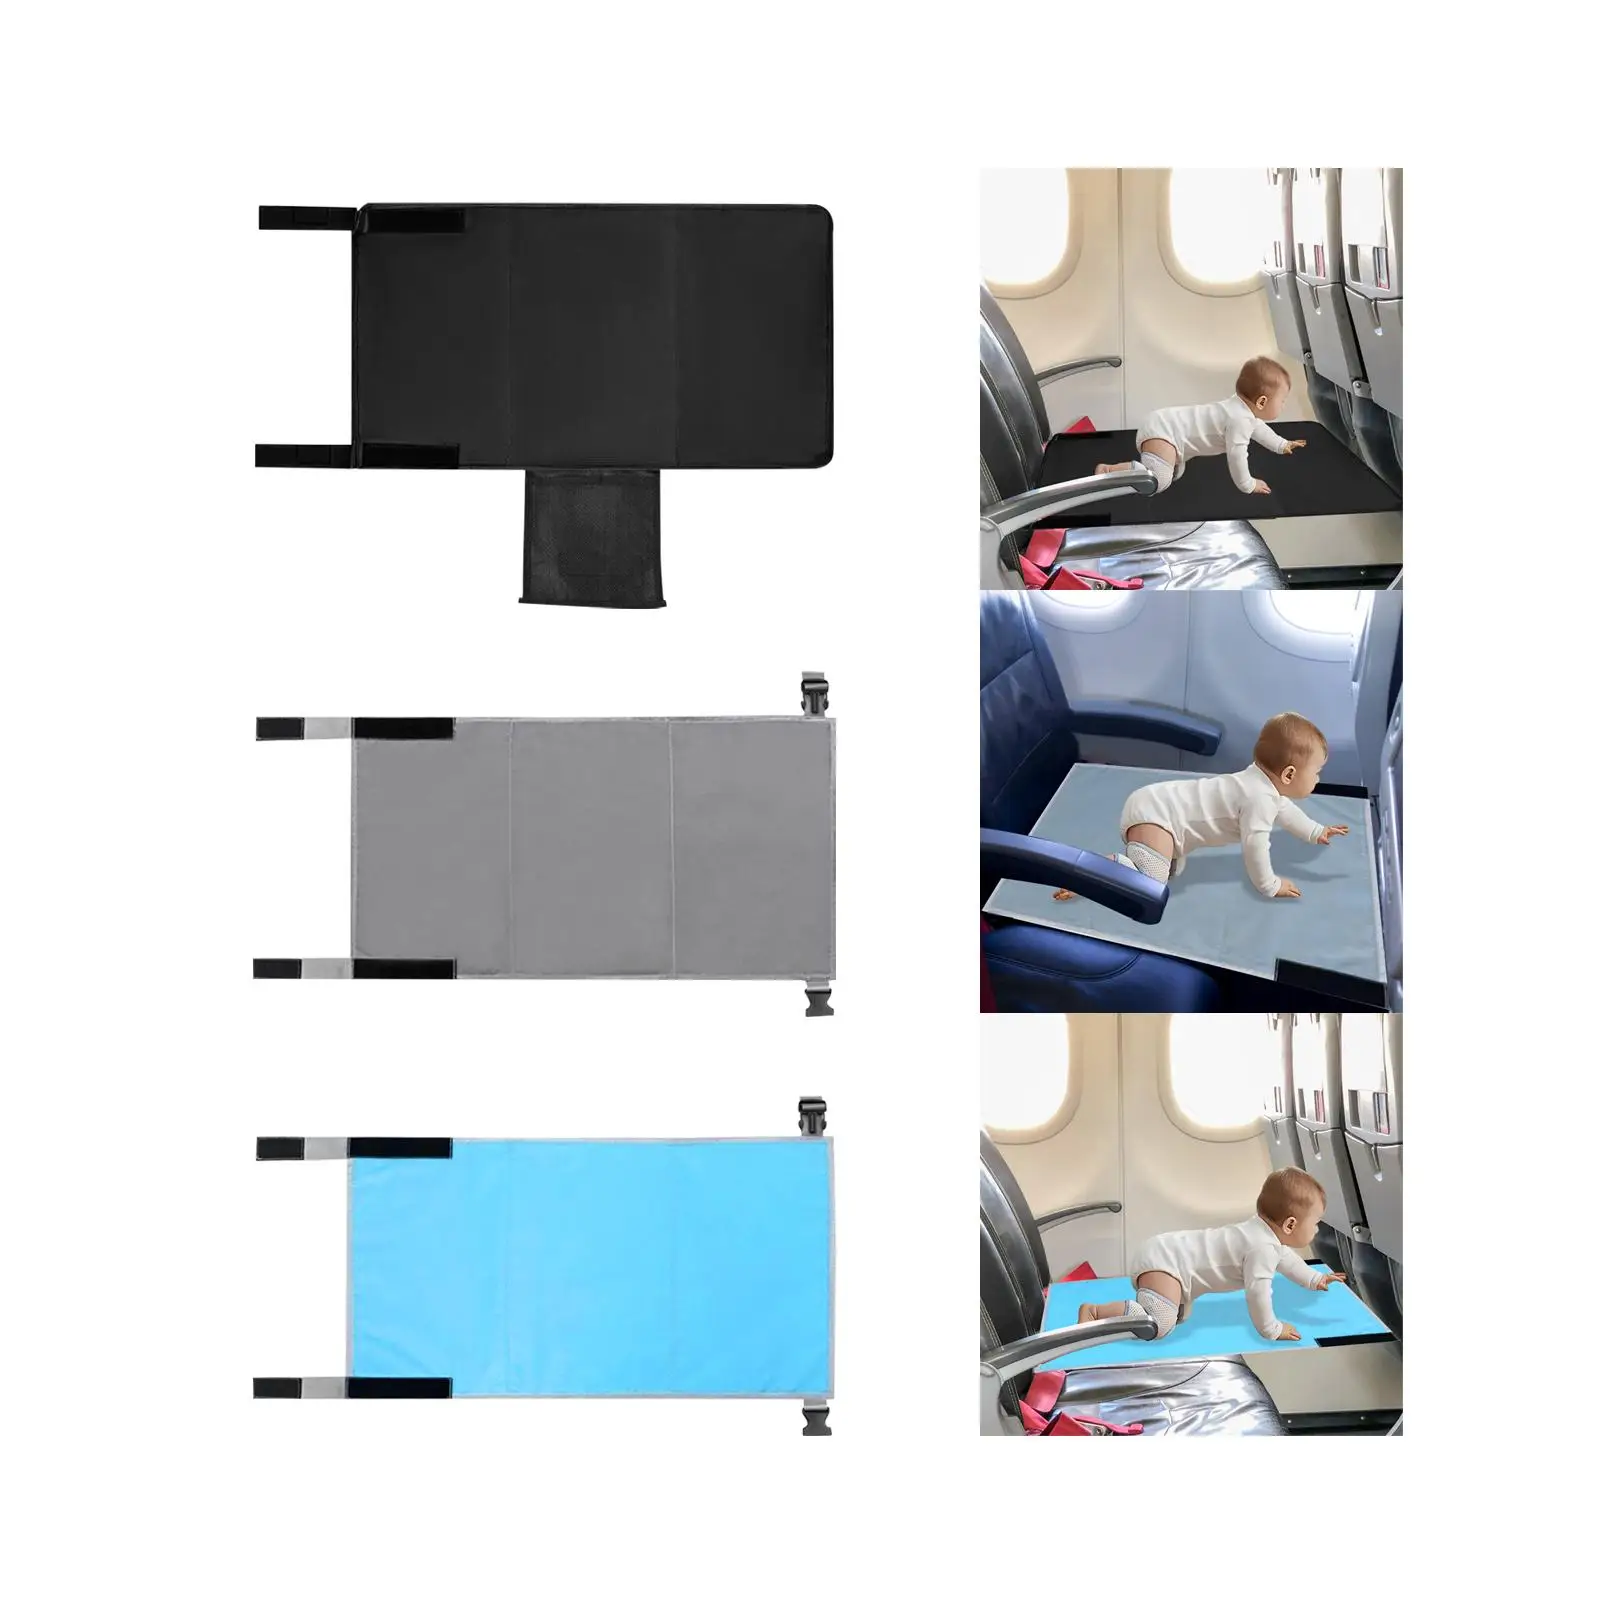 Airplane Foot Hammock Portable Foot Leg Rest Adjustable Travel Toddlers Bed Travel for Kids to Lie Down on Plane